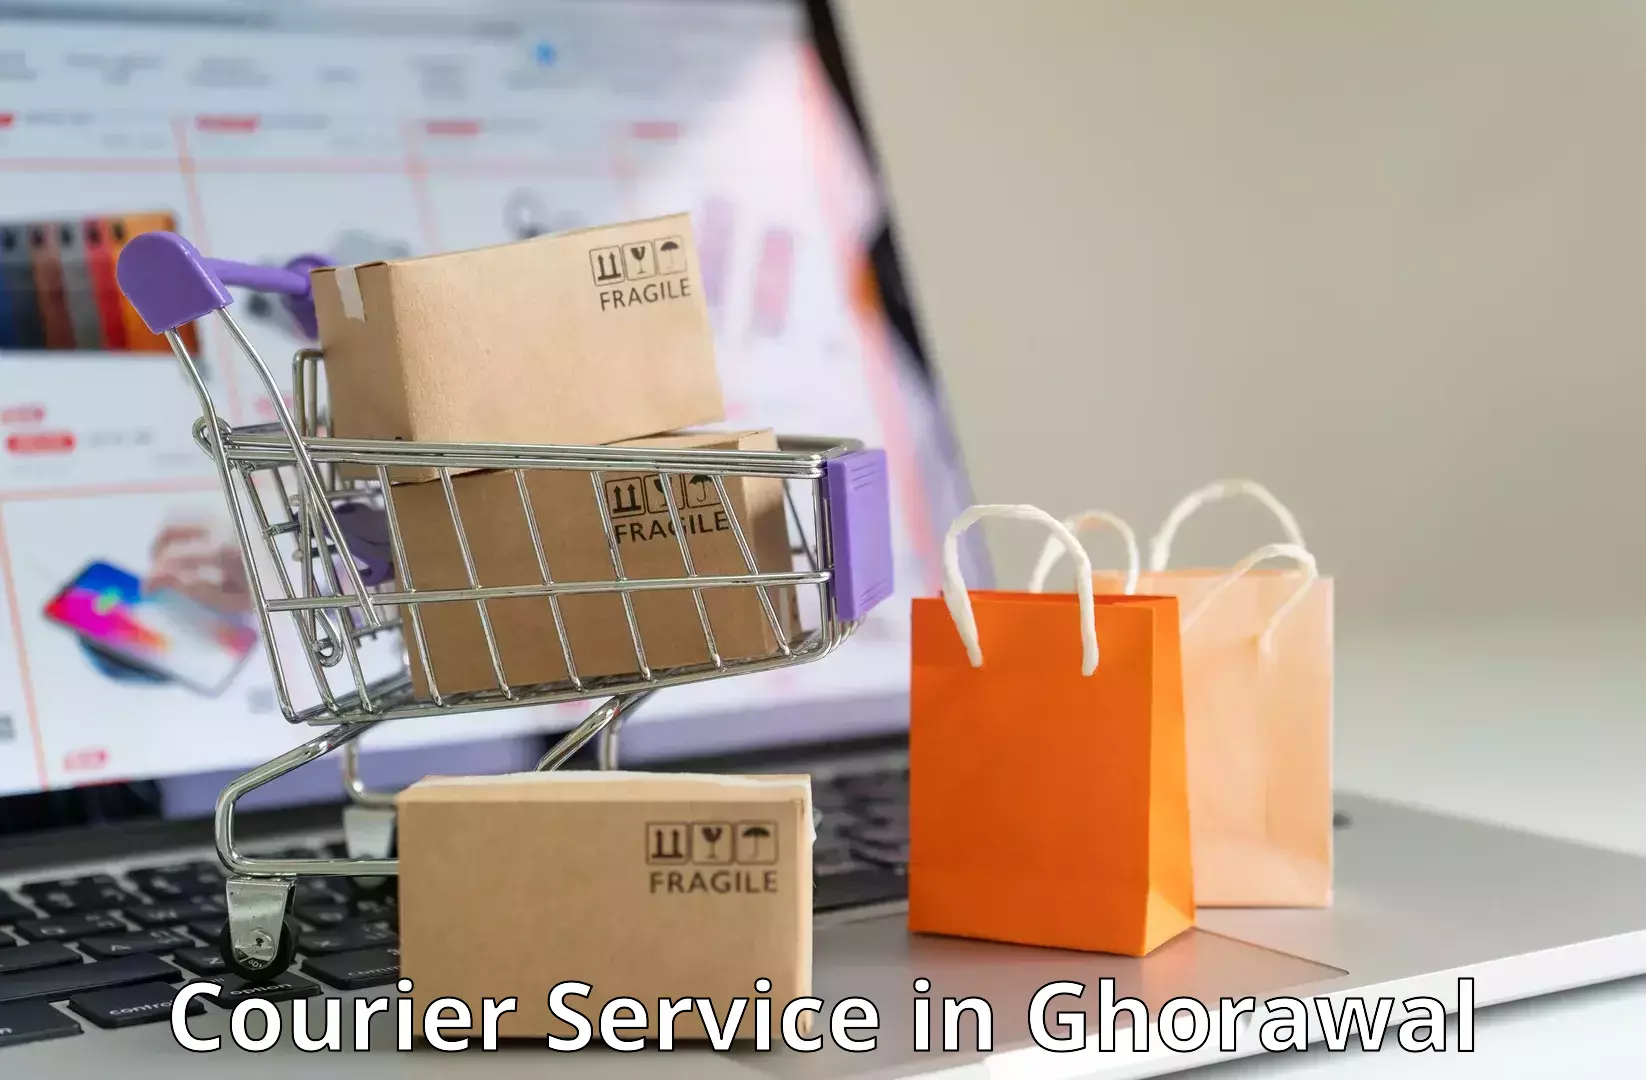 Quality courier partnerships in Ghorawal